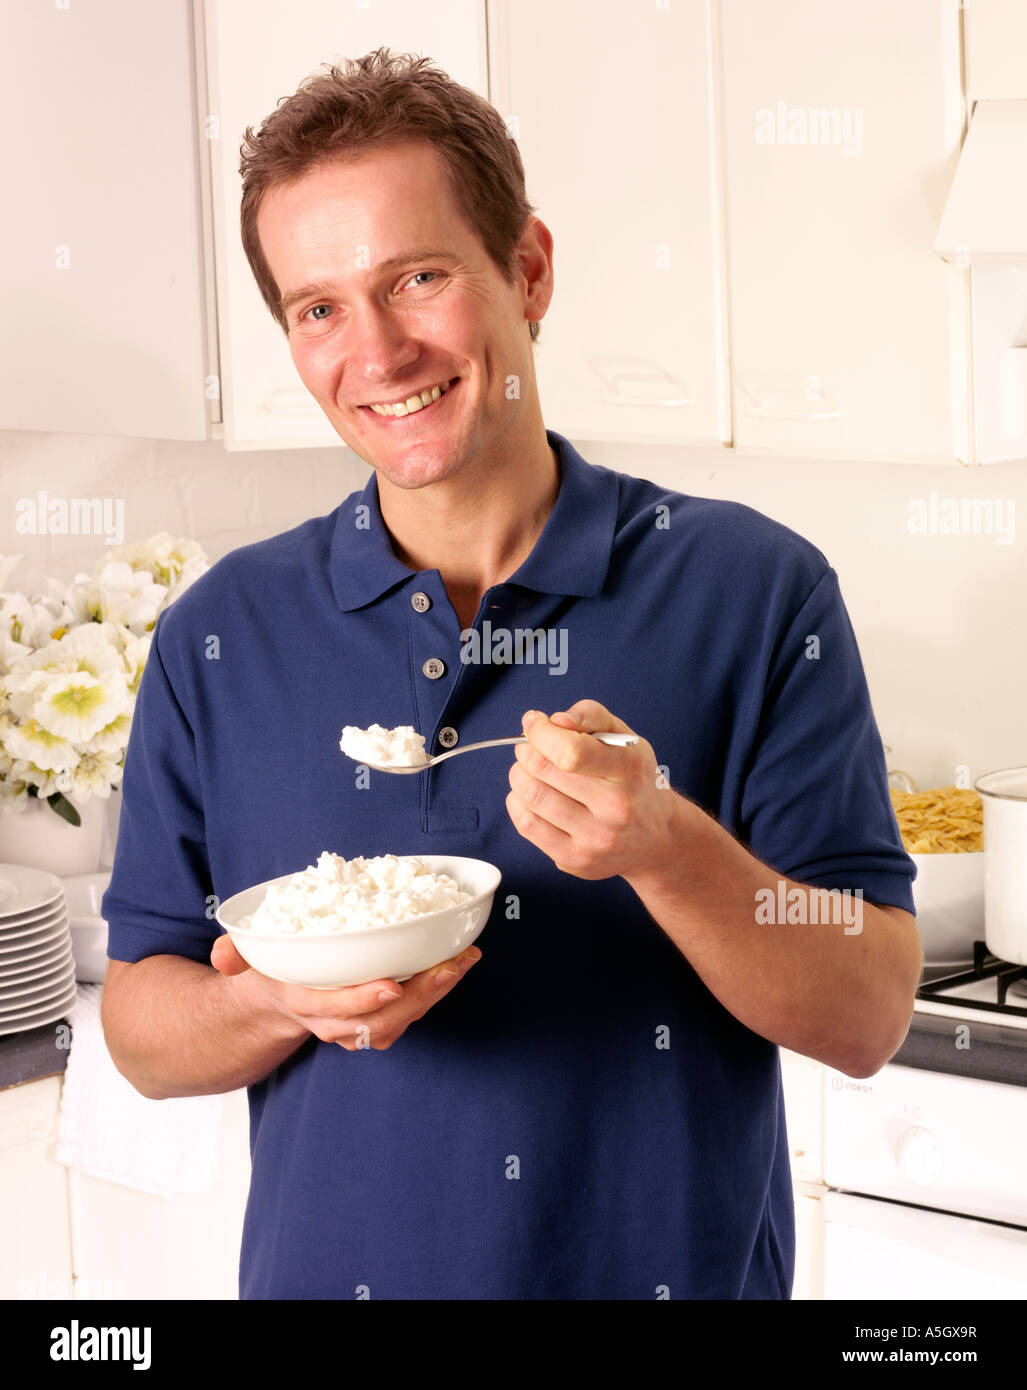 Man In Kitchen Eating Cottage Cheese Stock Photo 11310994 Alamy